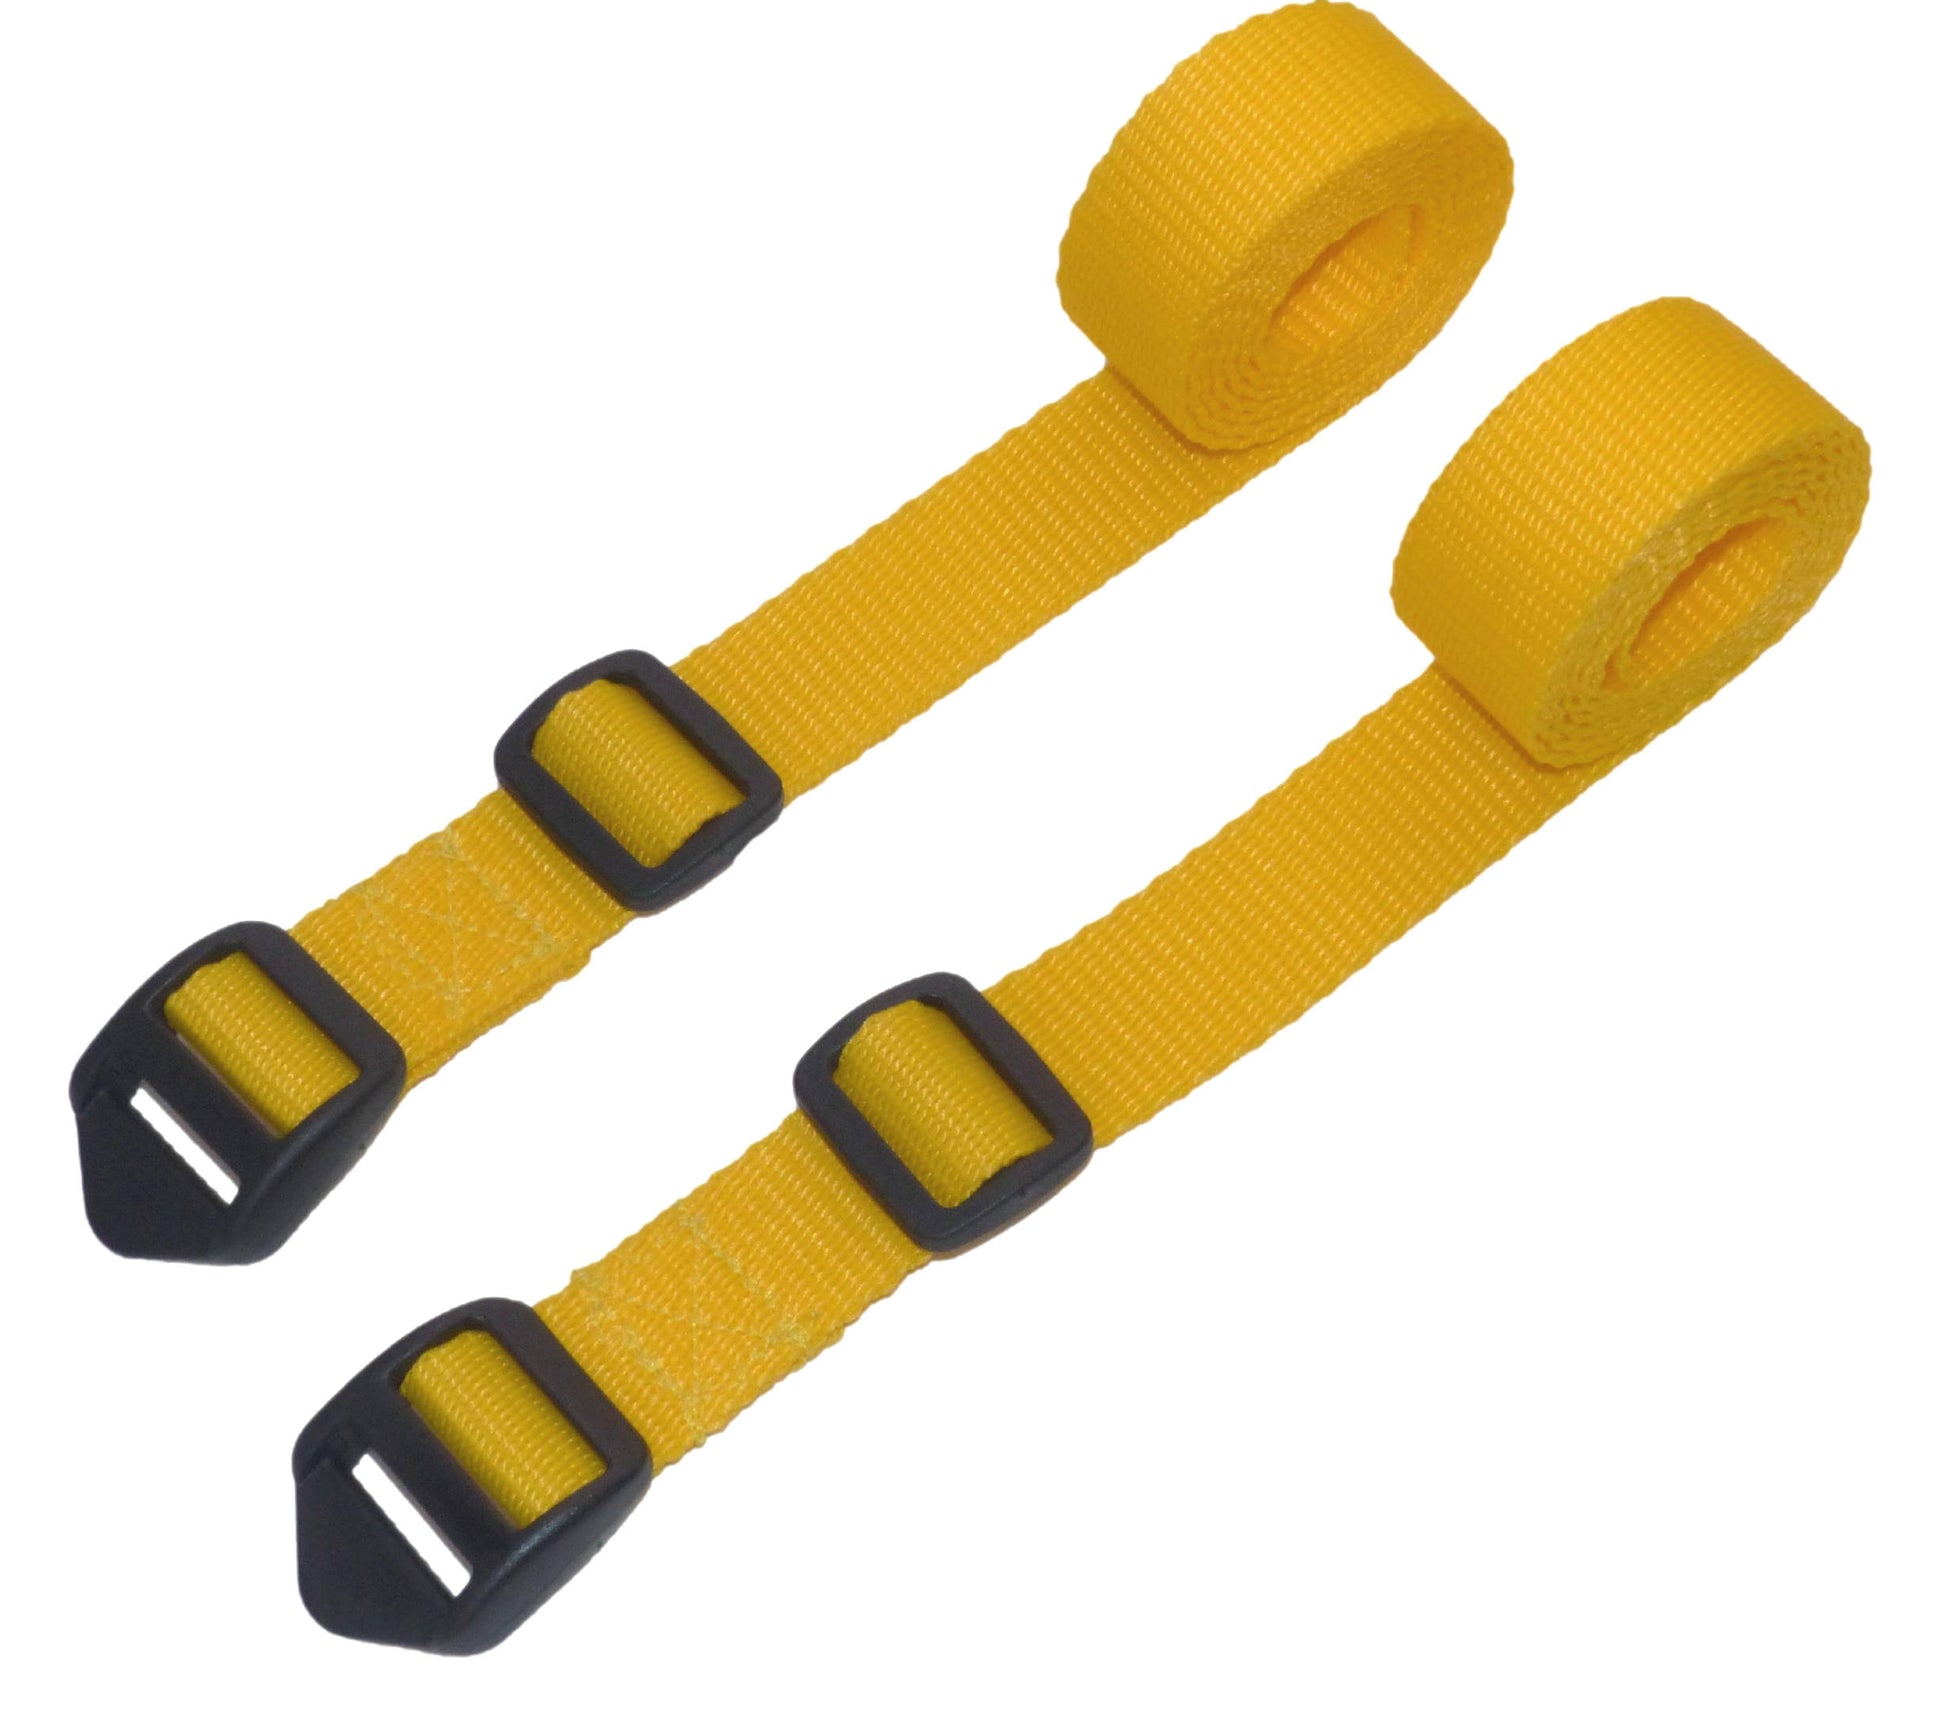 The Benristraps 25mm Camping Straps, 150cm (pair) in yellow